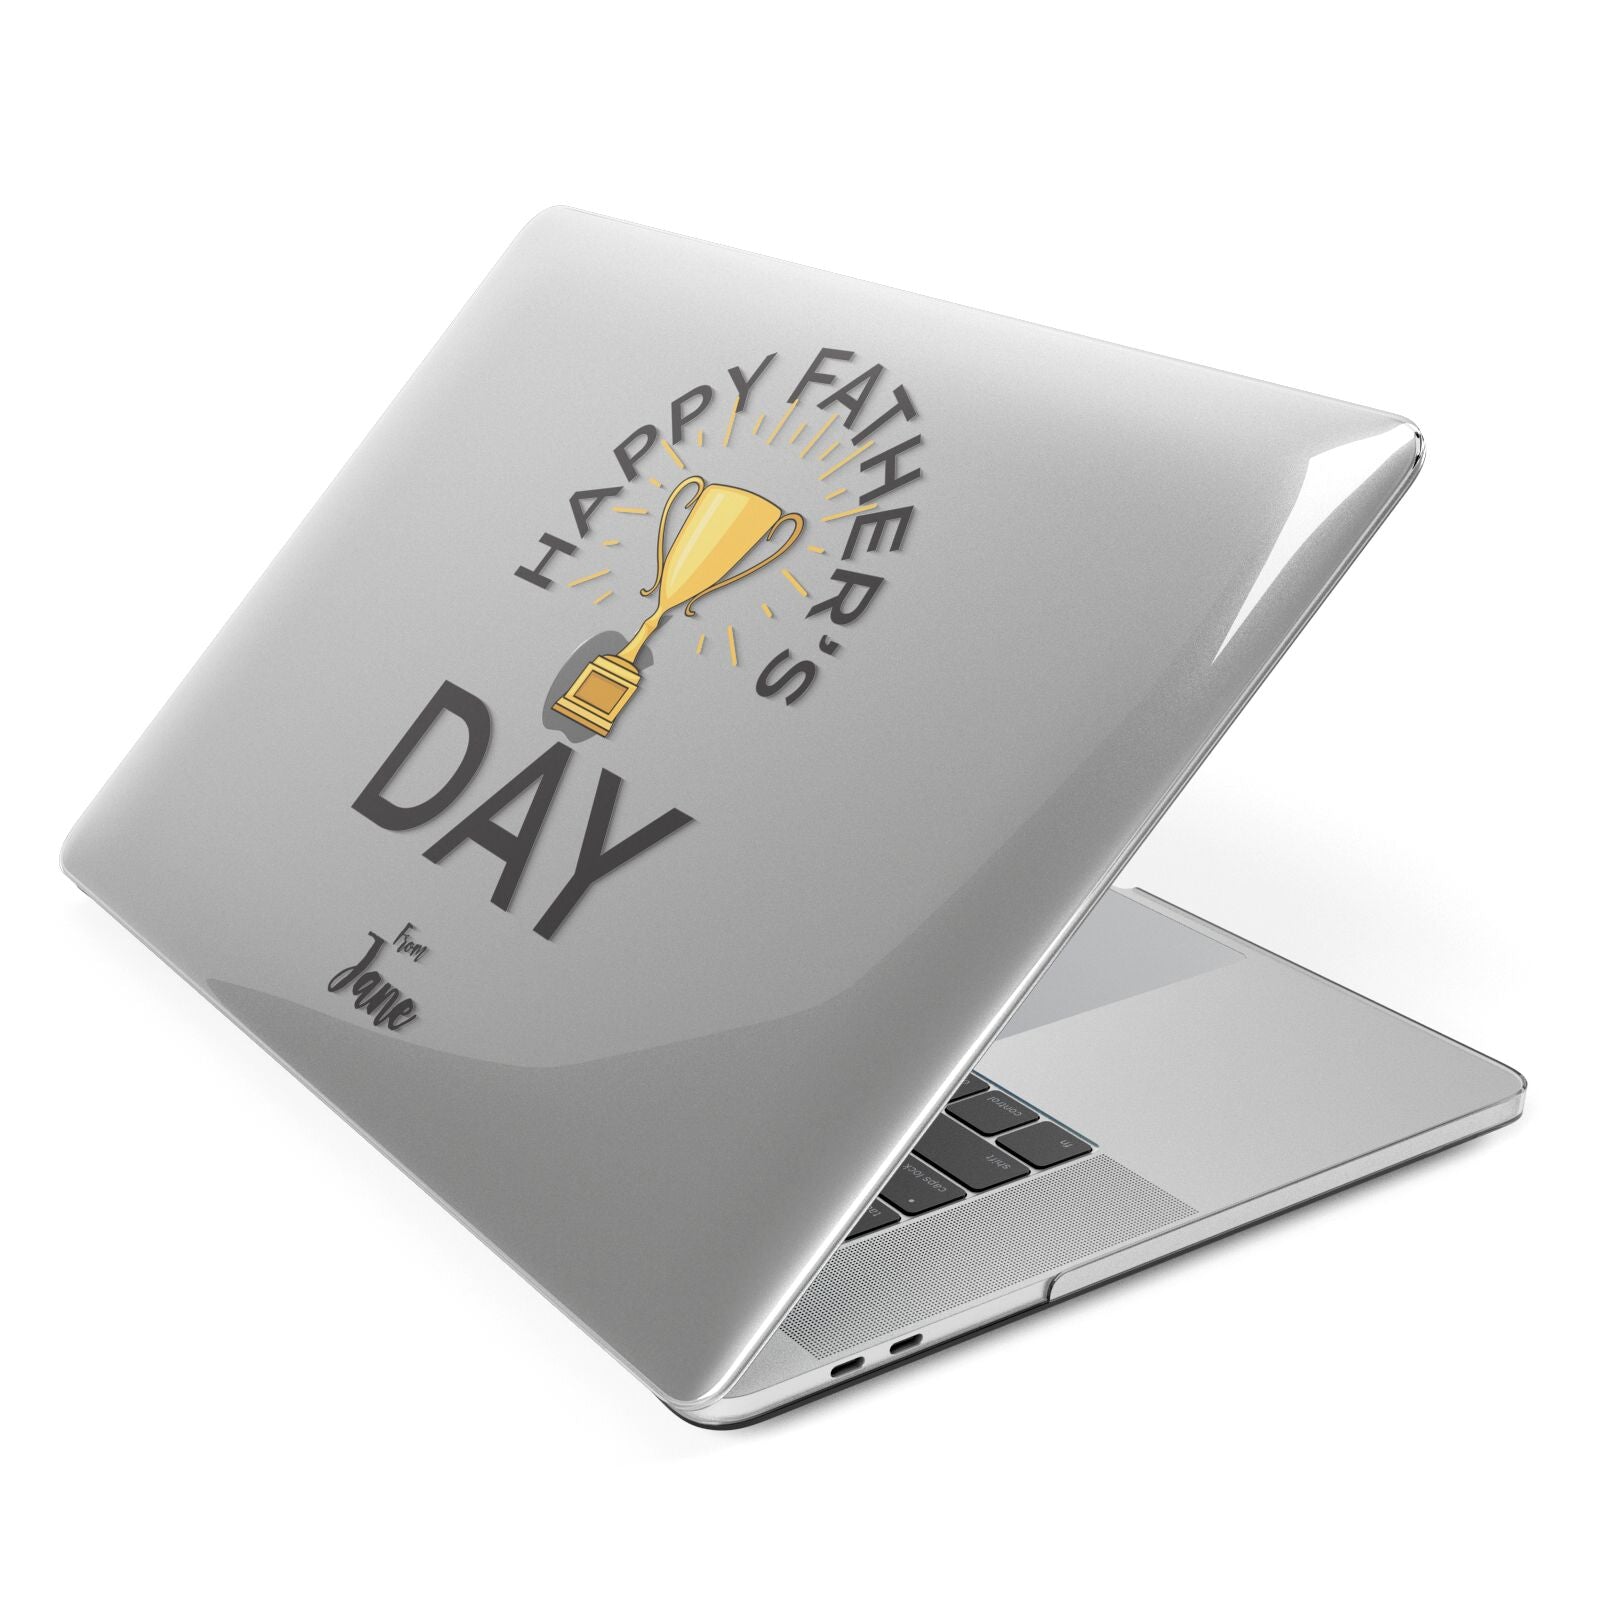 Happy Fathers Day Apple MacBook Case Side View